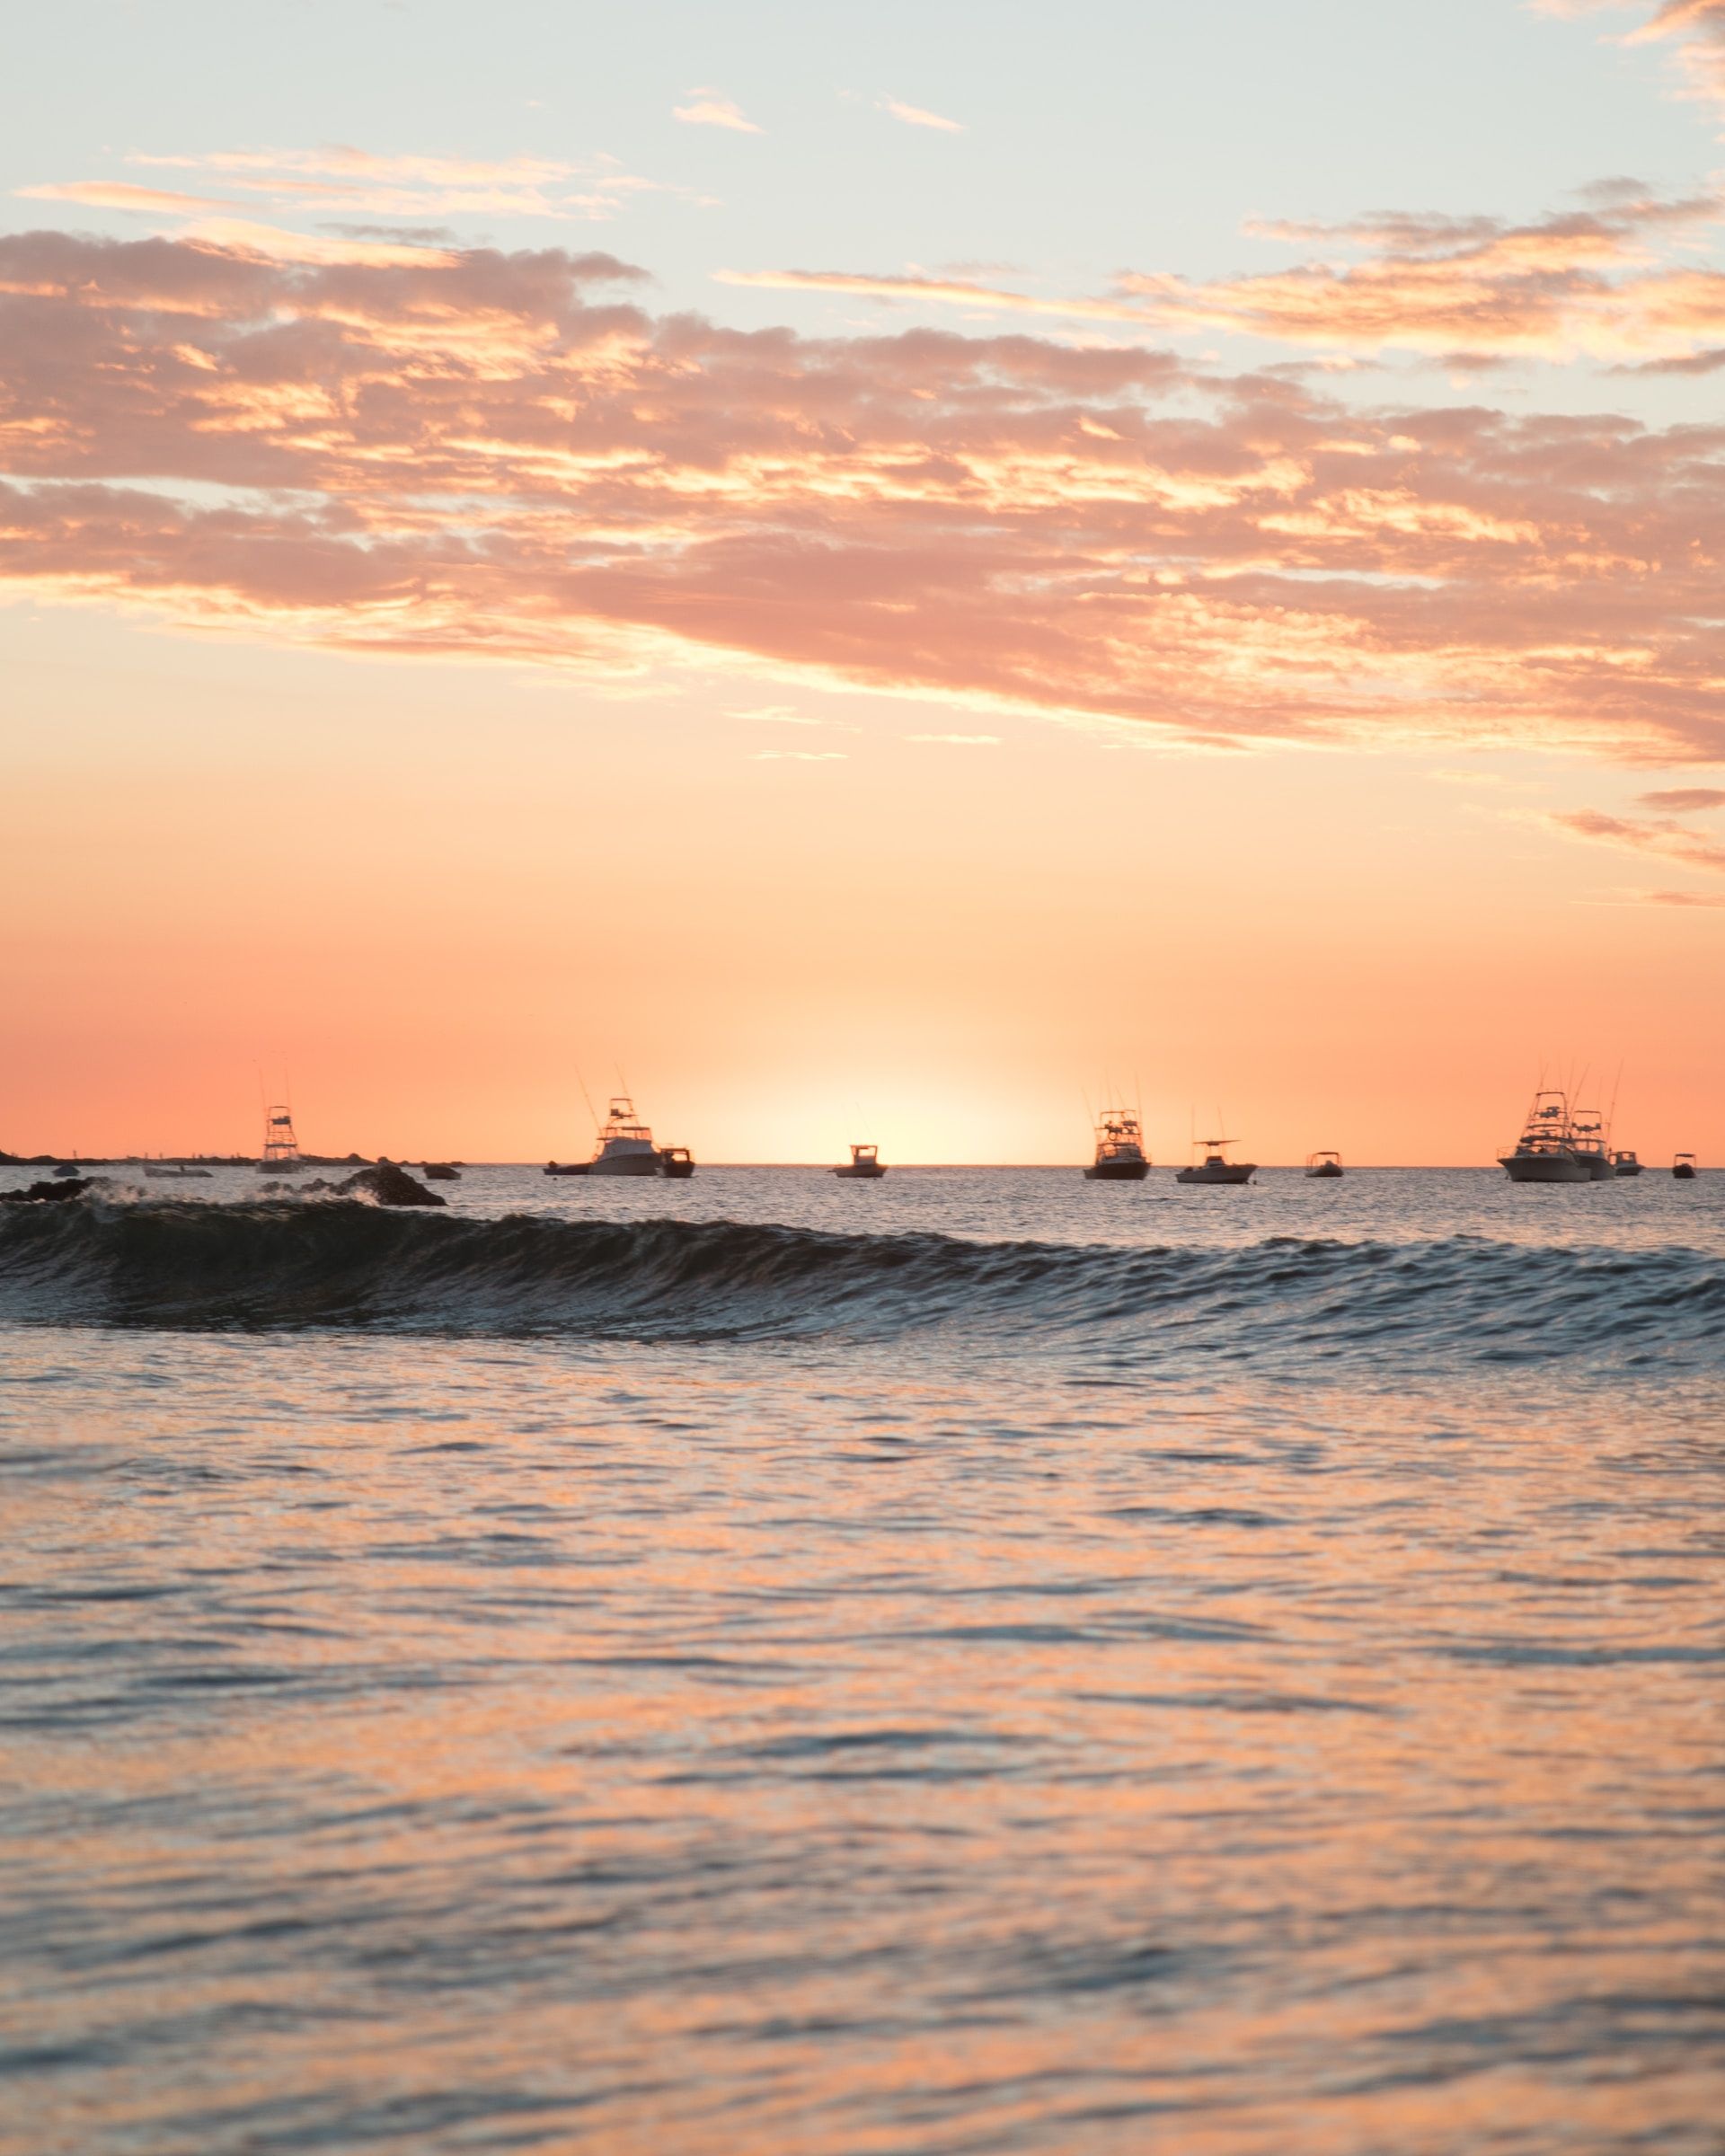 Fishing boats on the water at sunset in Tamarindo, Costa Rica